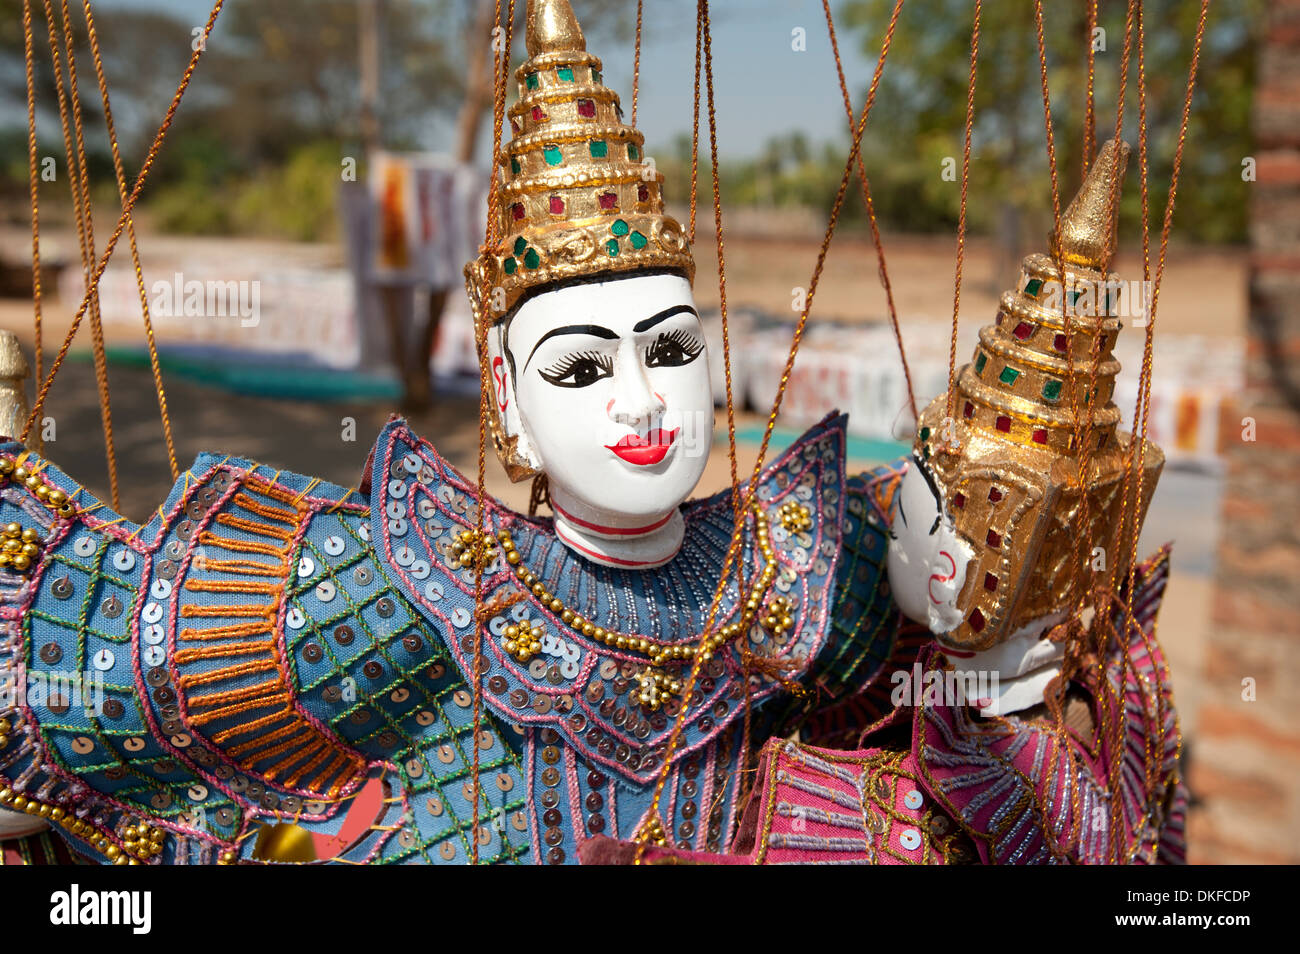 Detail close up of Burmese mythical marionette puppets Bagan Myanmar (Burma) Stock Photo